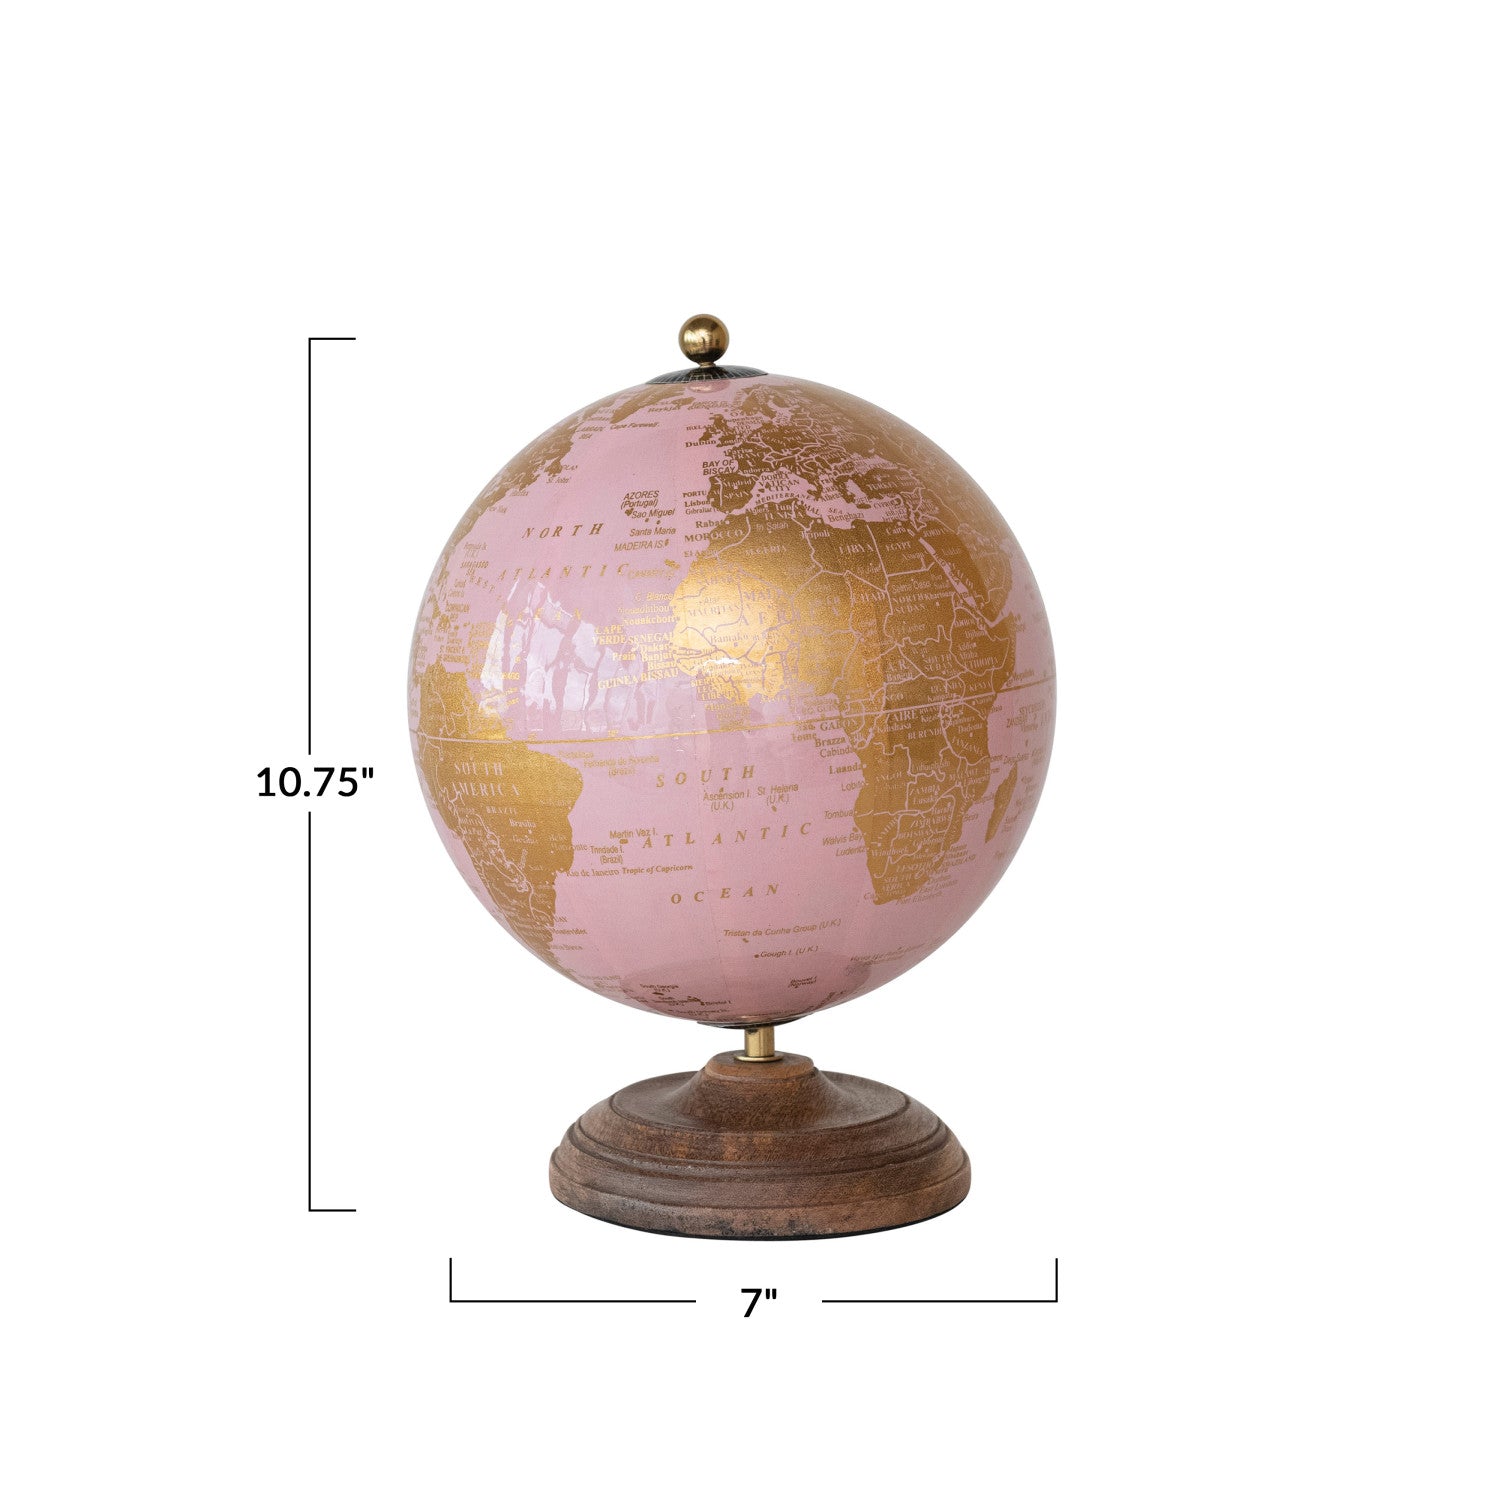 Pink & Gold Globe on Mango Wood Stand measures 10 inches high and 7 inches wide. 